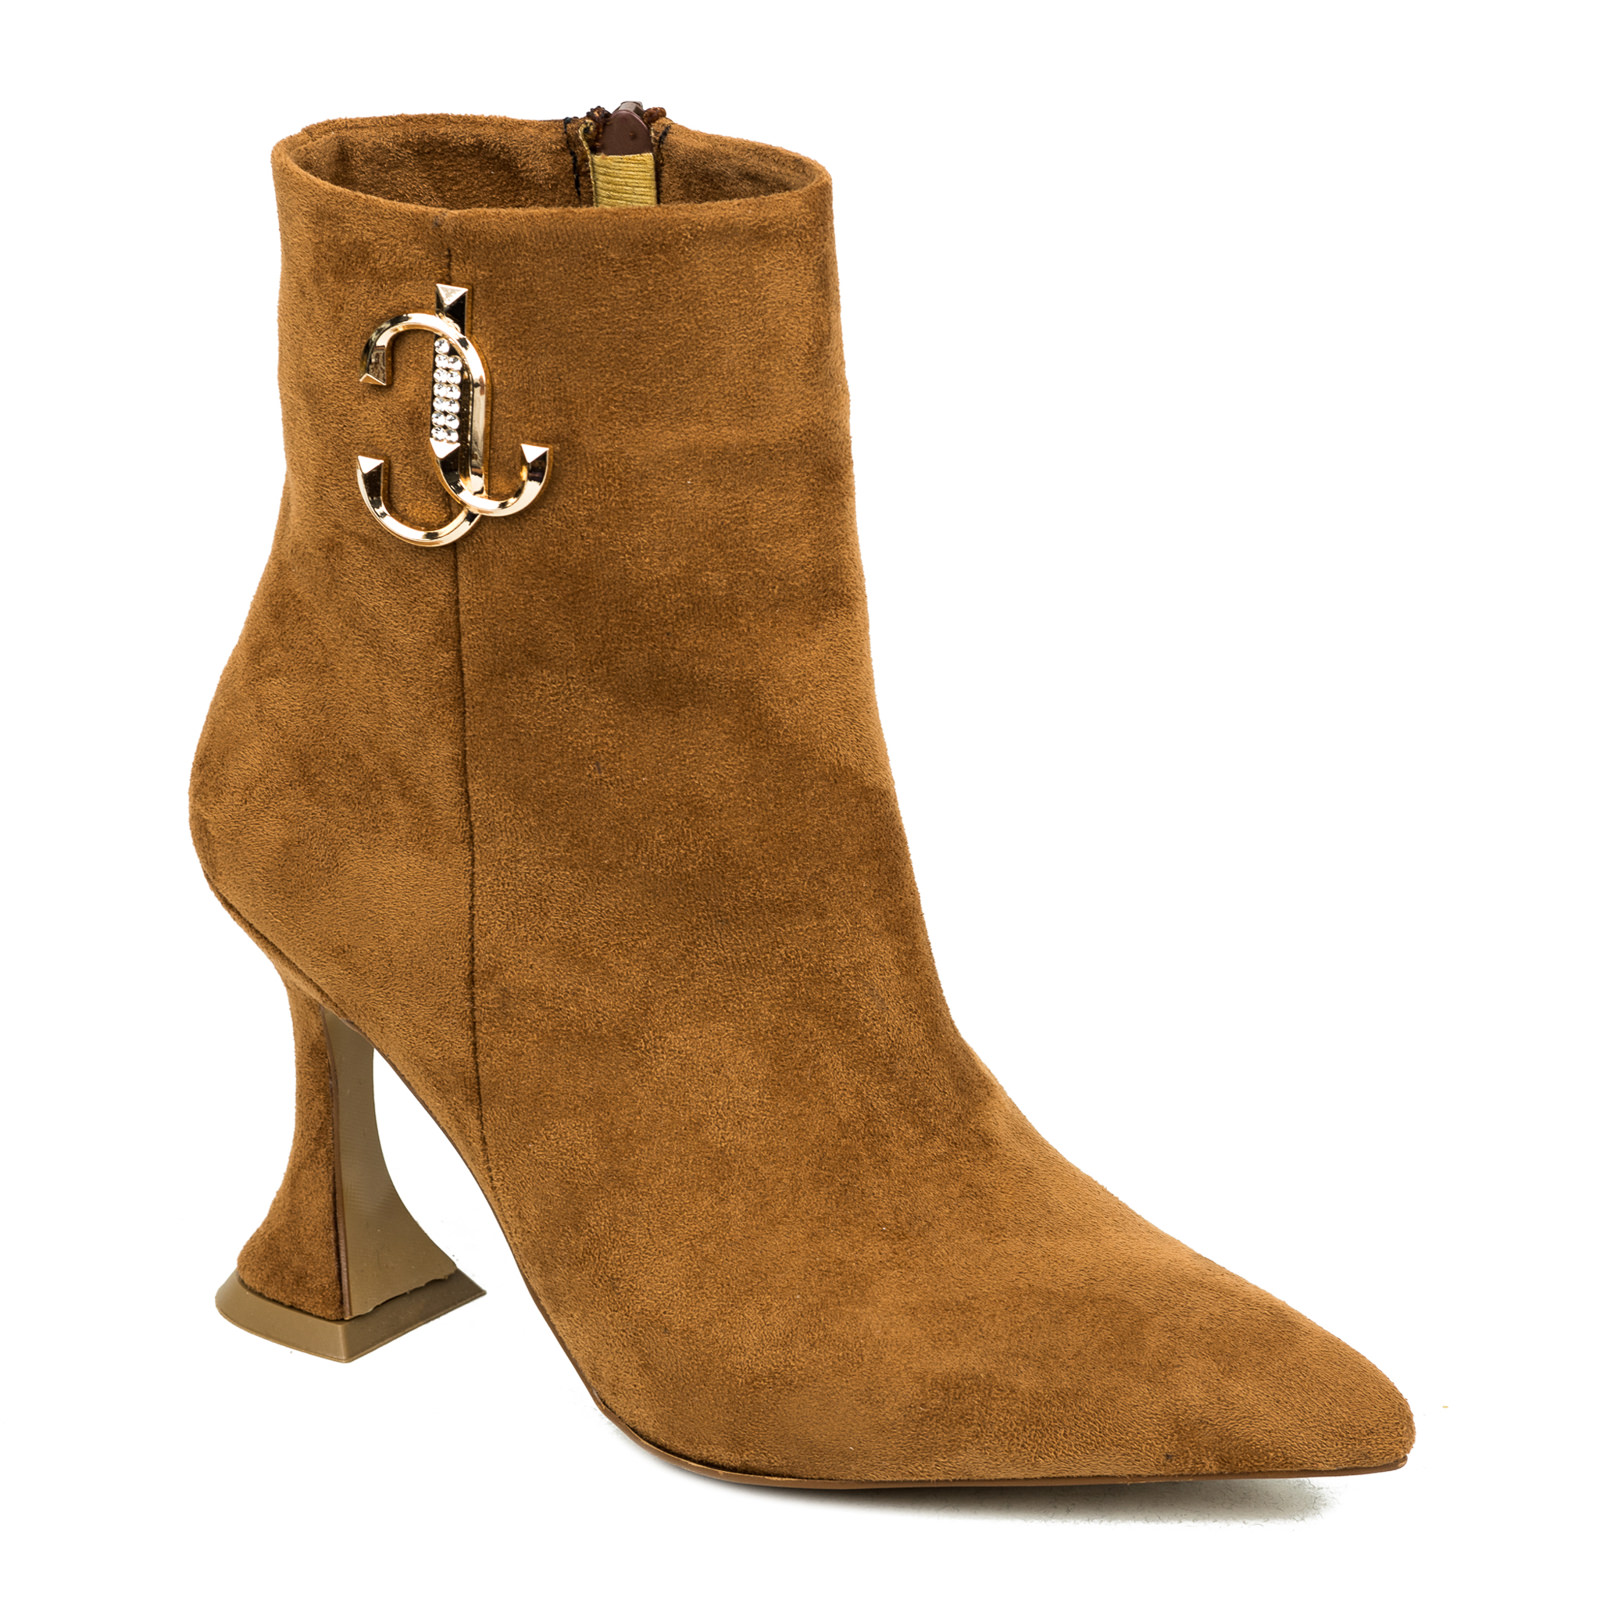 Women ankle boots B169 - CAMEL